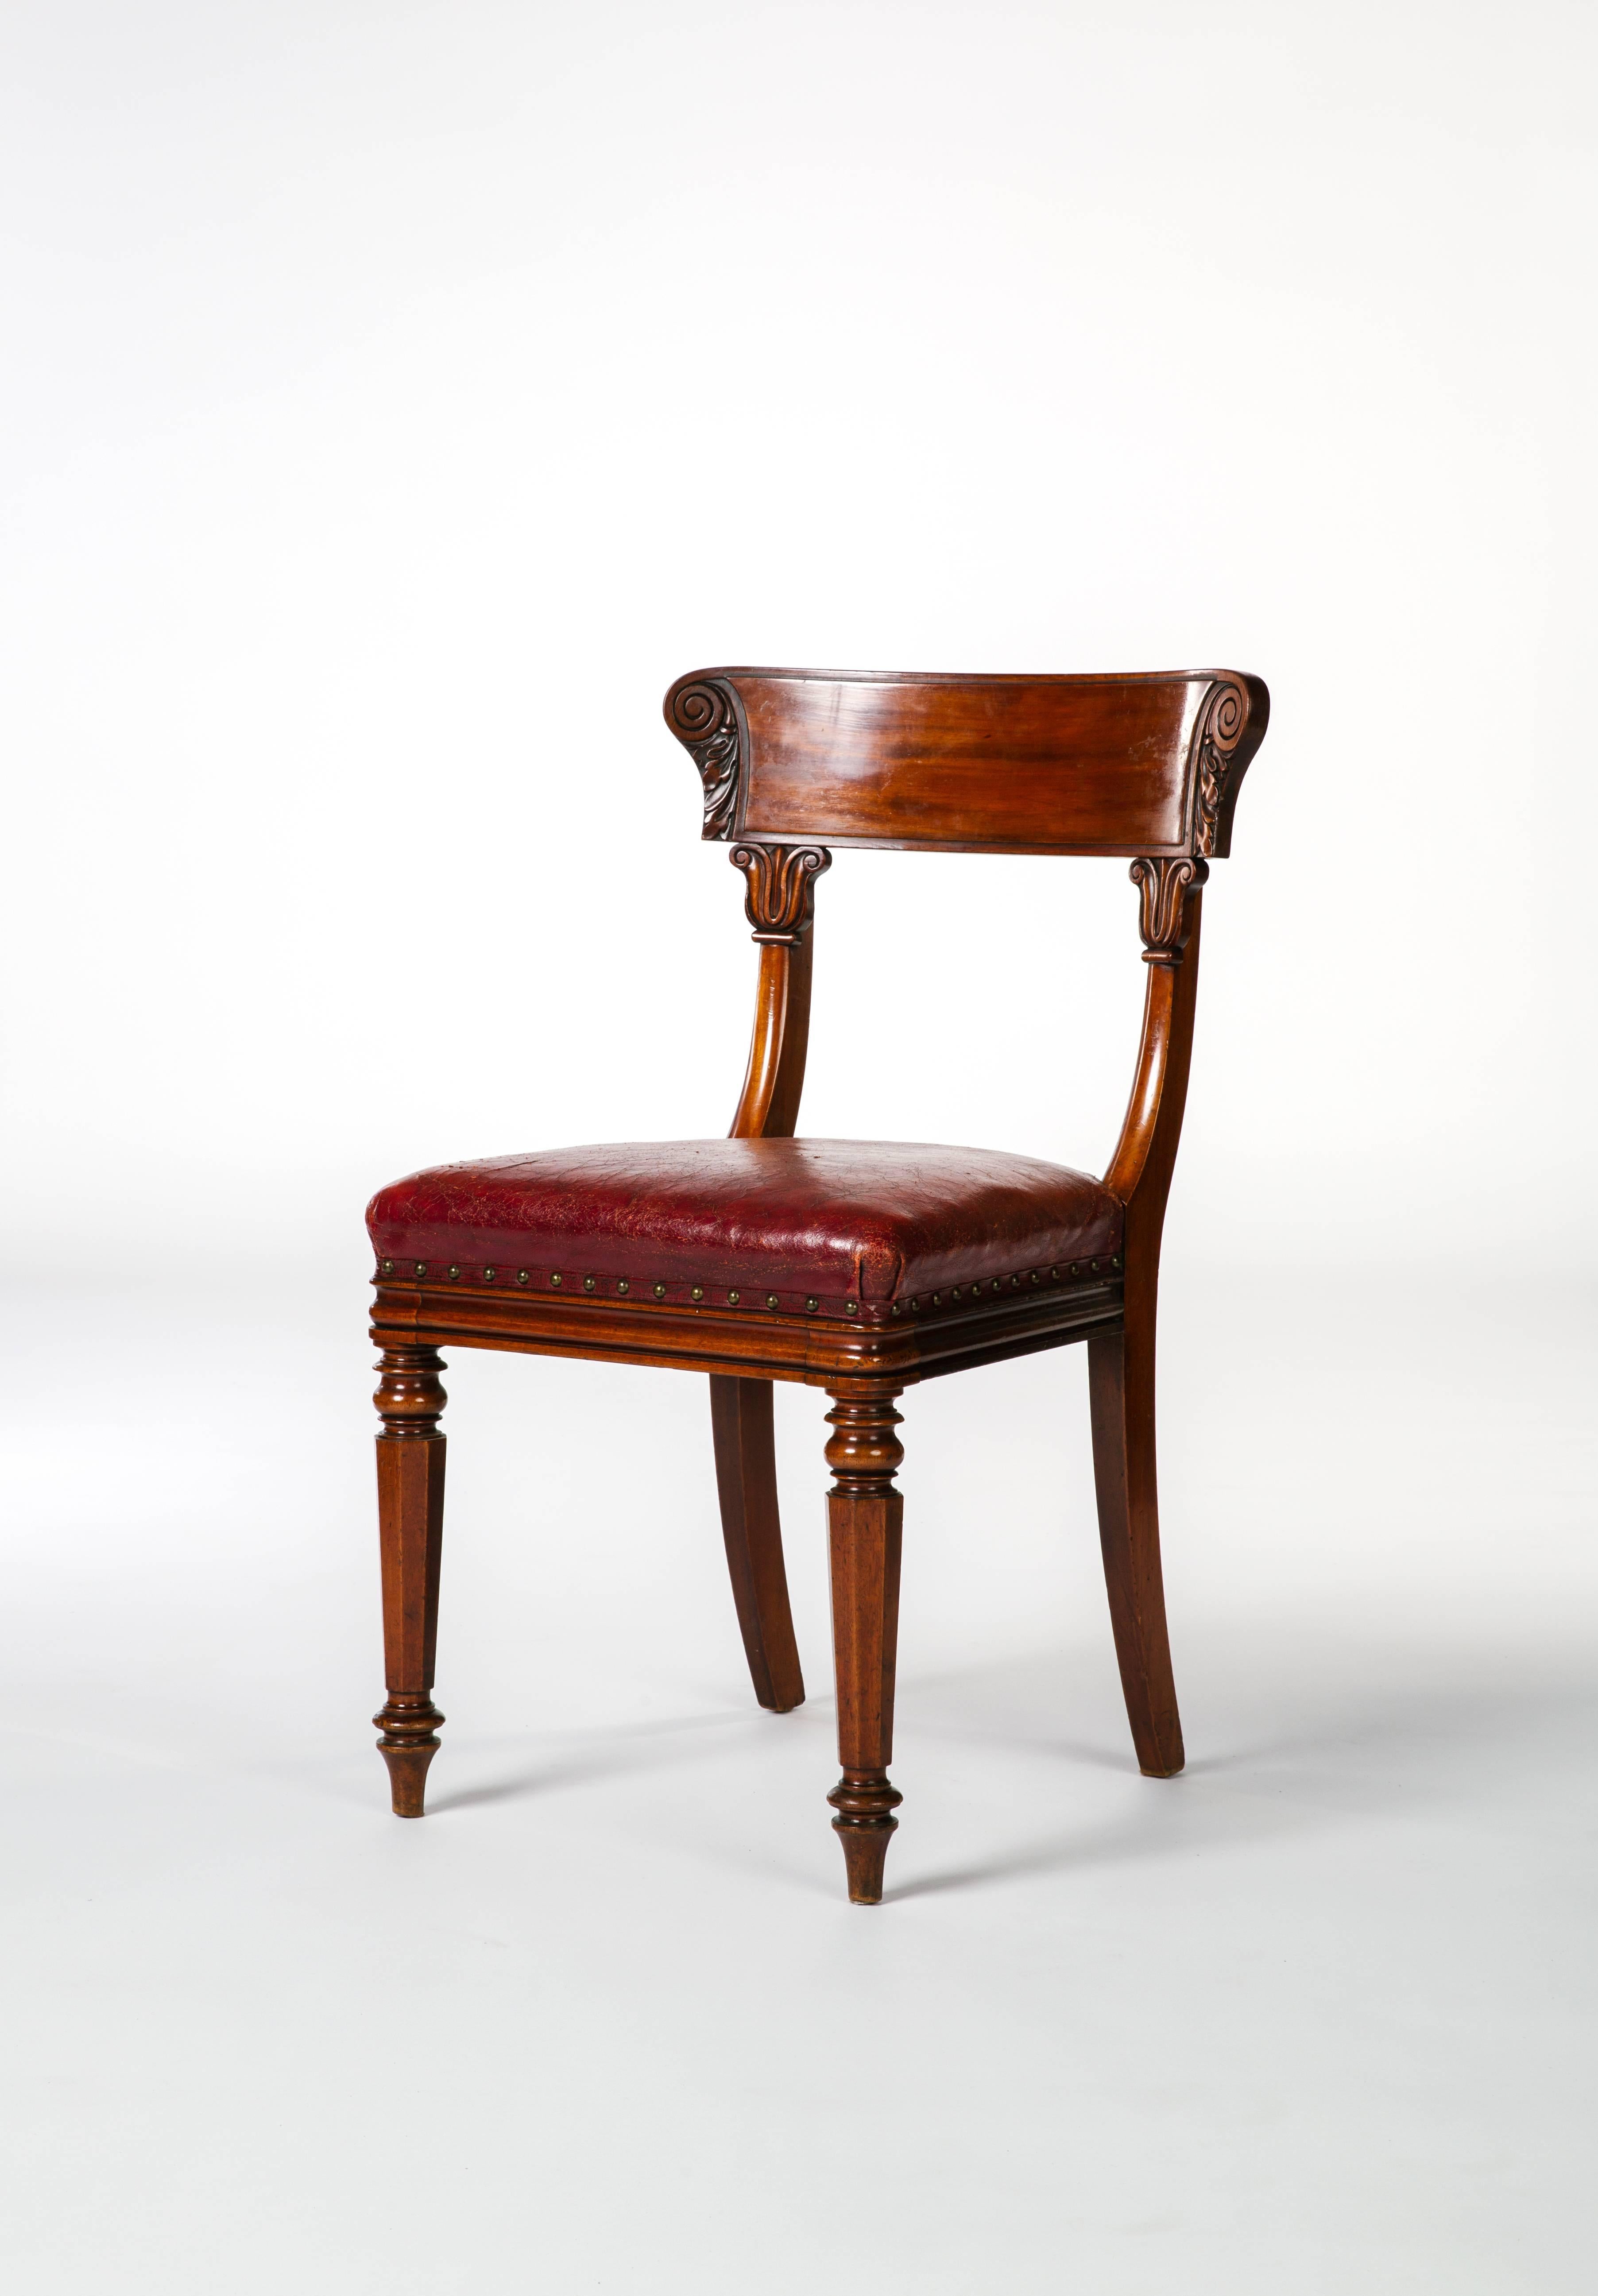 This is a beautiful set of late Regency mahogany side chairs with antique red Moroccan leather upholstery,
circa 1820.